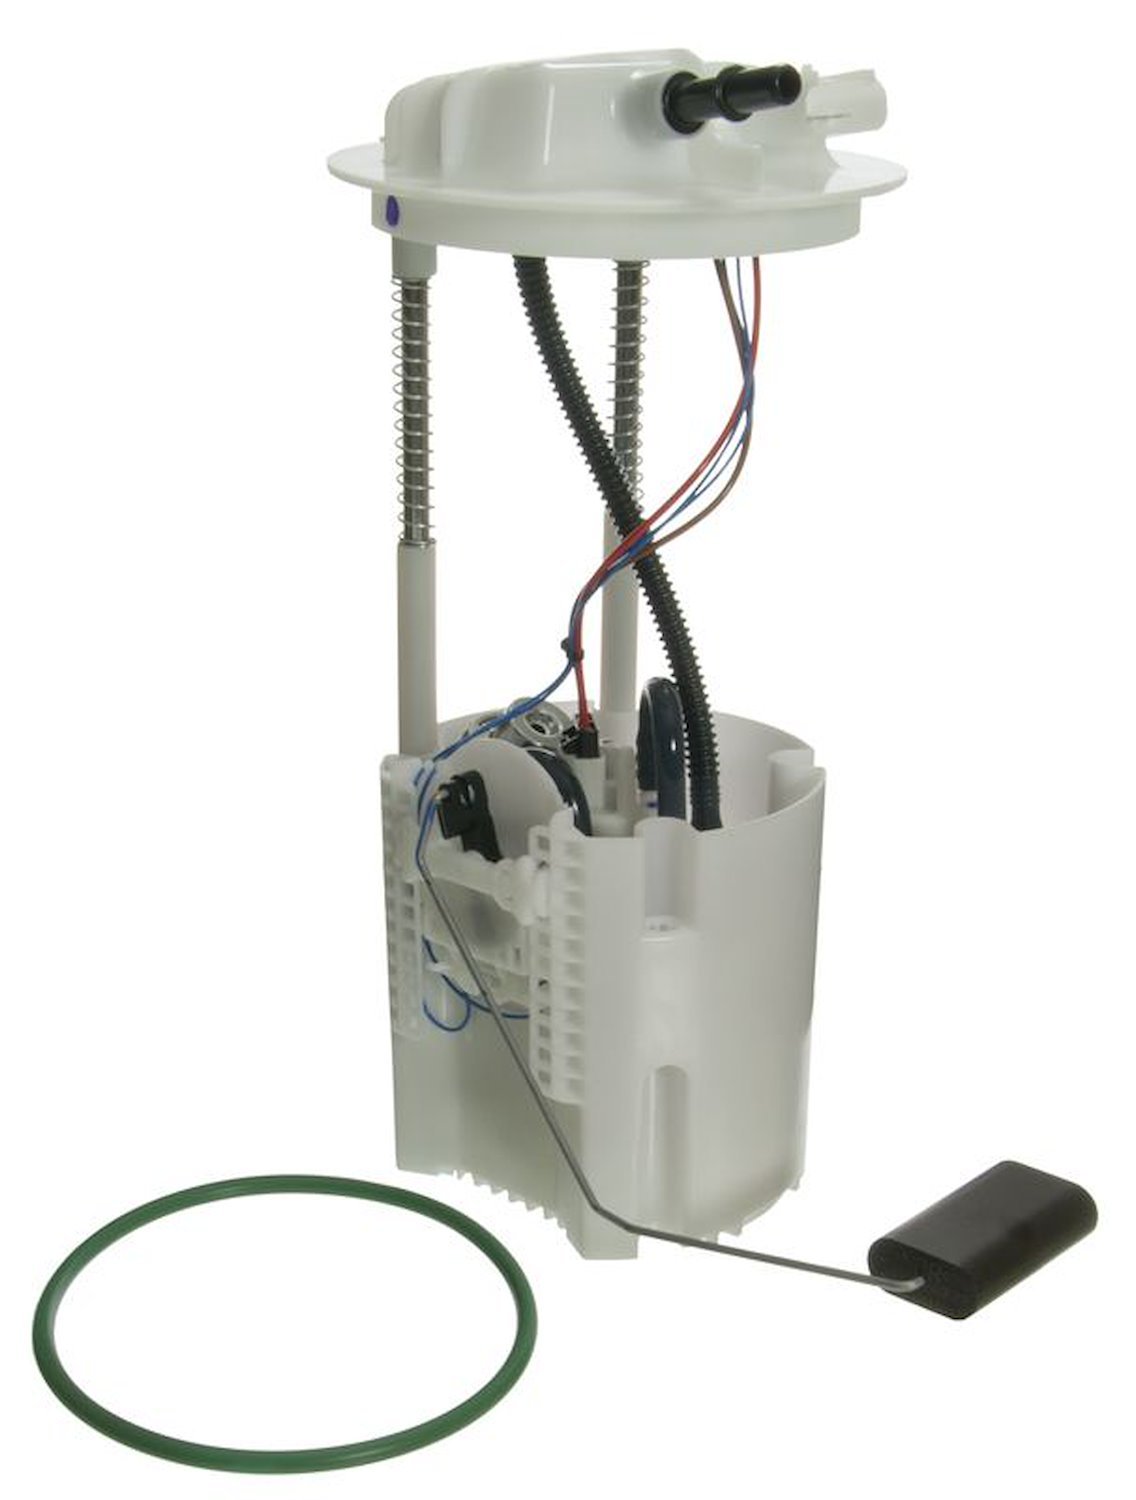 OE Chrysler/Dodge/Jeep Replacement Fuel Pump Module Assembly 2007-2011 Dodge Nitro/2008-2012 Jeep Liberty